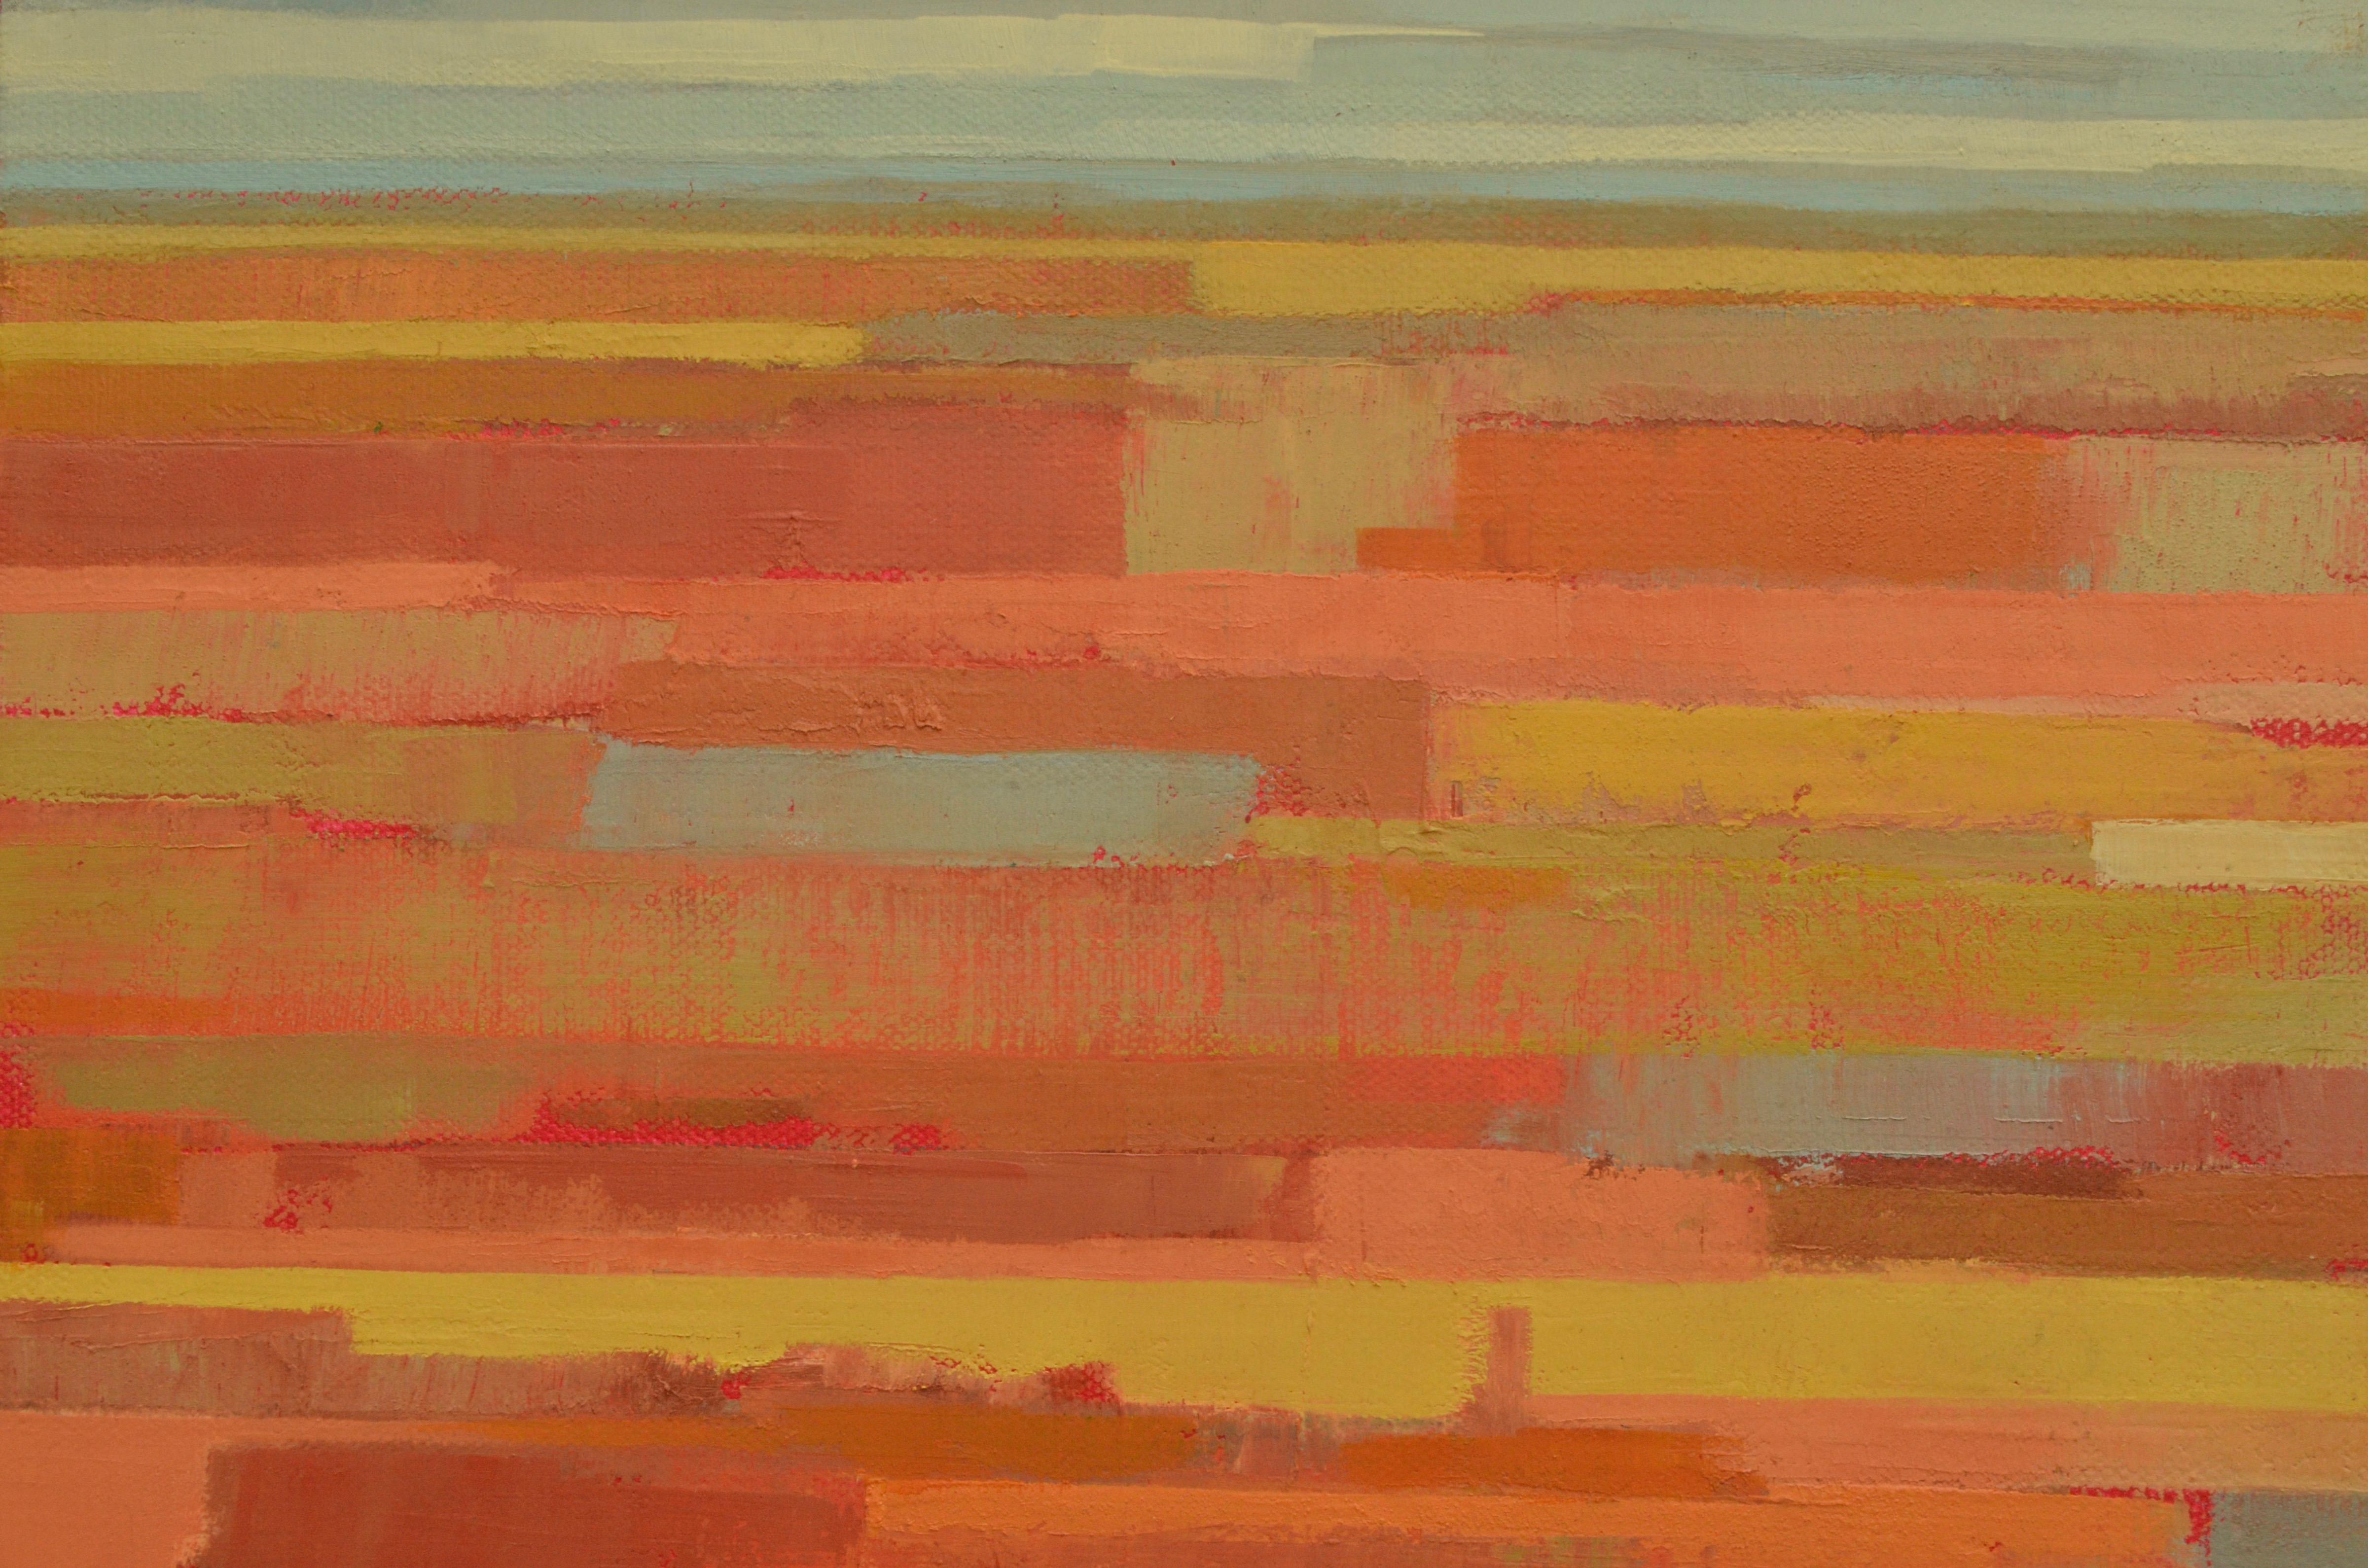 <p>Artist Comments<br /> This landscape was inspired by vast fields and horizons that end in skies. From a distance these fields form horizontal stripes of colors blending, often interrupted with other landscape forms.  This piece is on a gallery